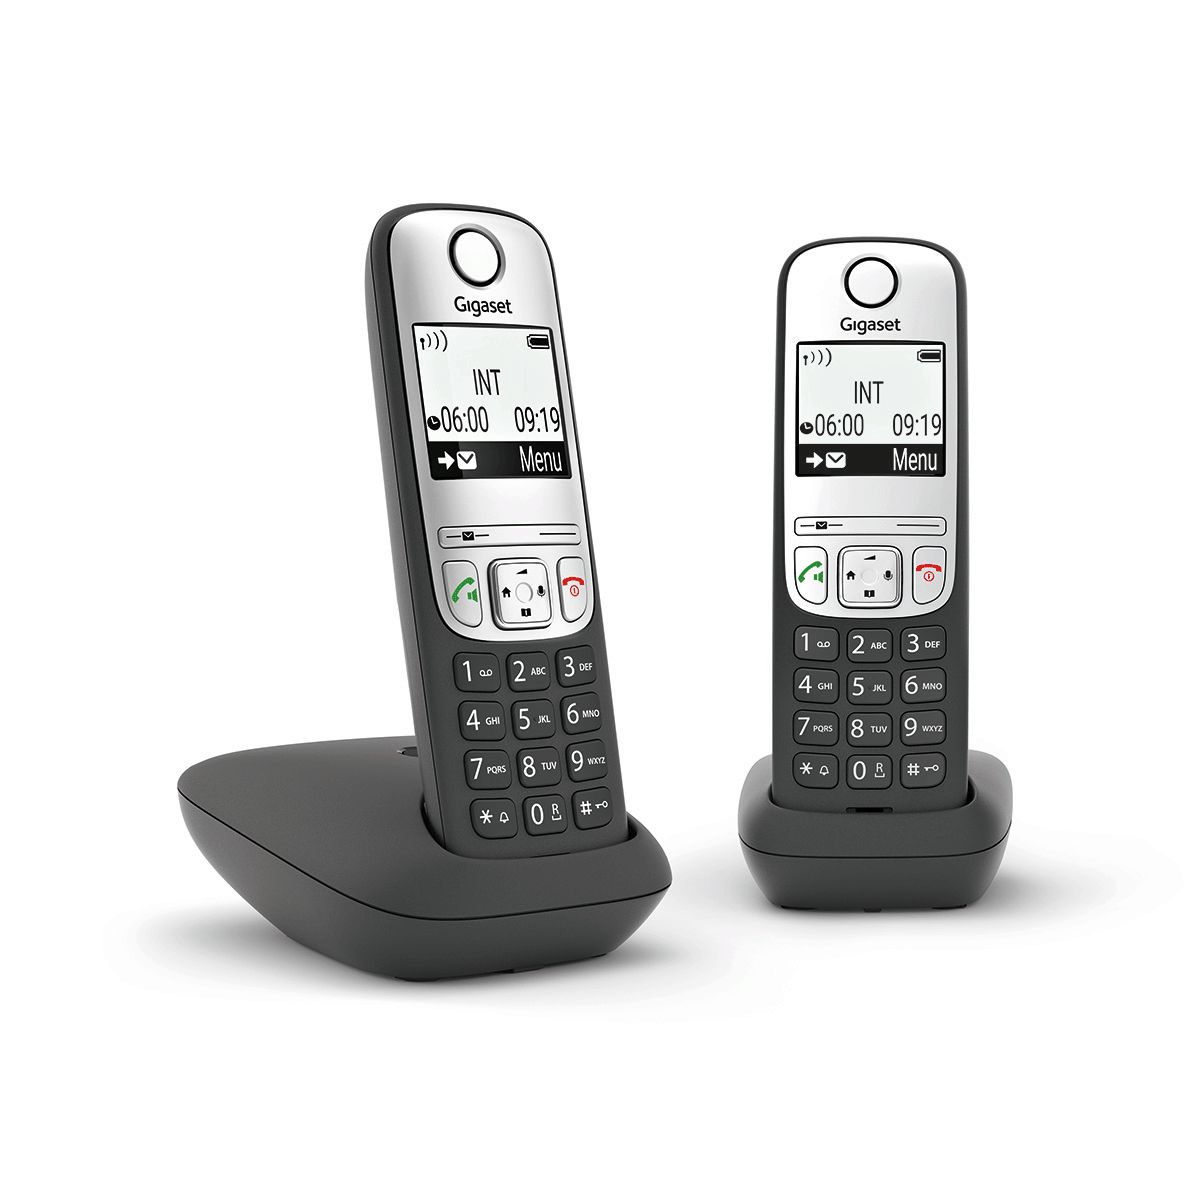 L36852-H2830-B101 UNIFY GIGASET OPENSTAGE A690A Duo - Analog/DECT telephone - Wireless handset - Speakerphone - 100 entries - Caller ID - Black